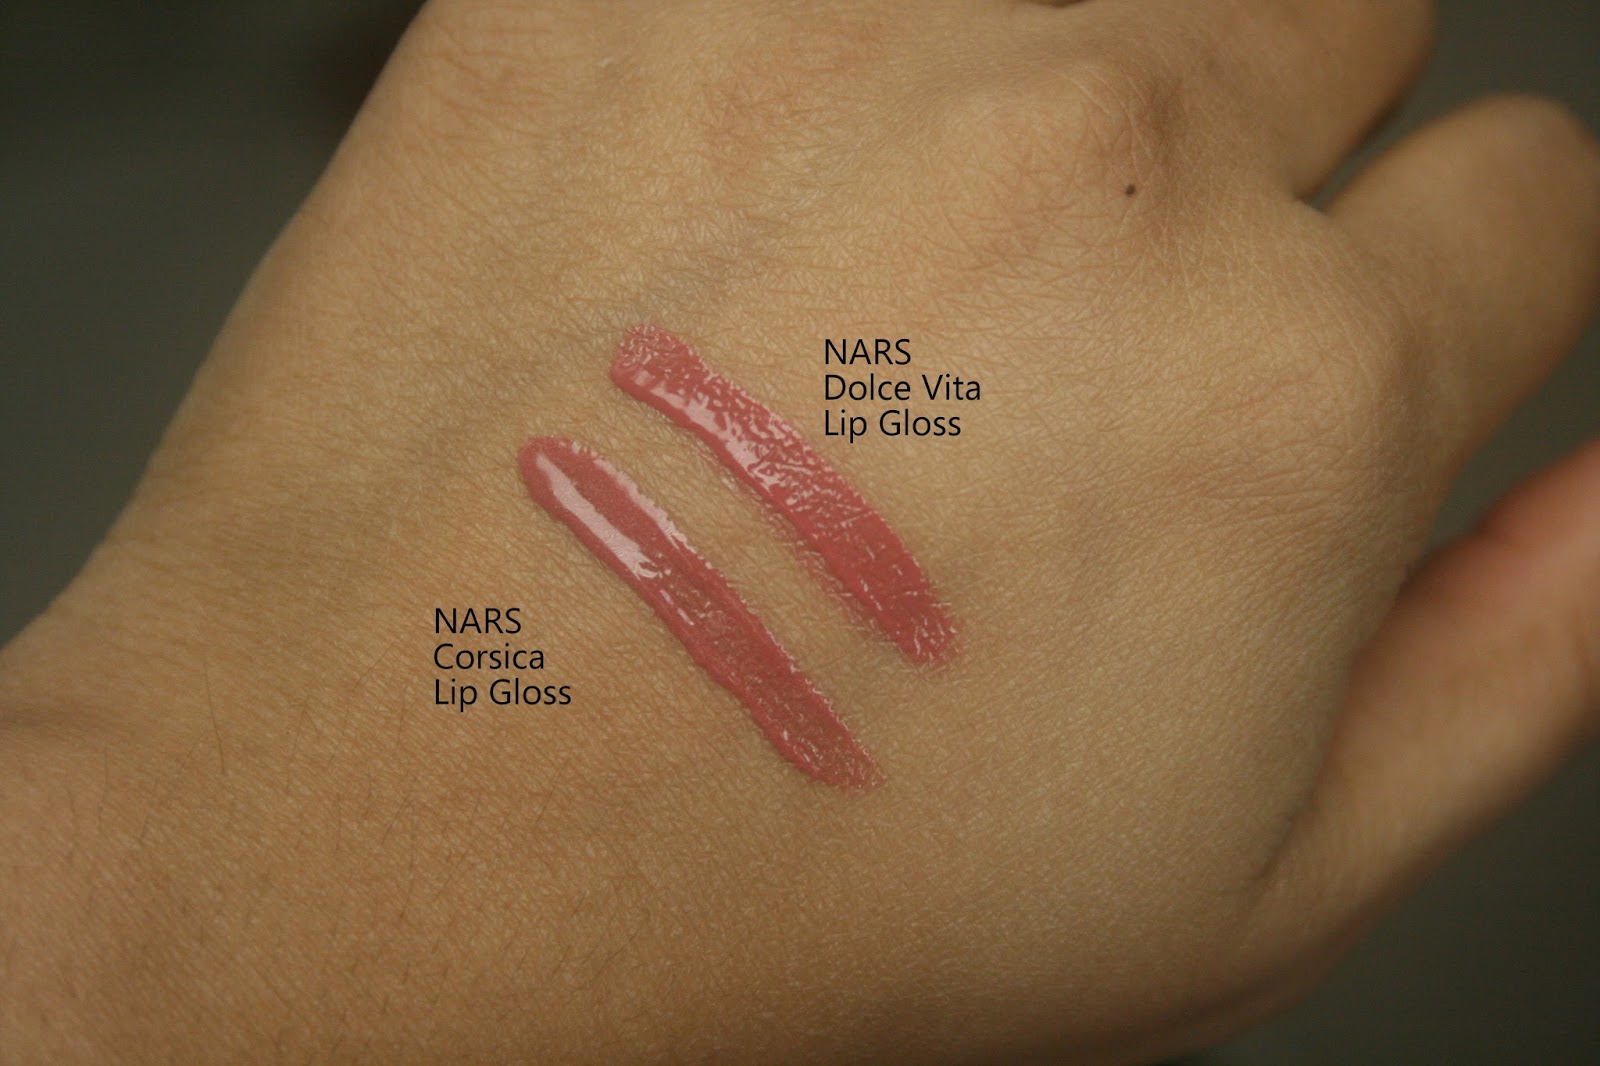 NARS Laced with Edge Holiday Collection Corsica Lip Gloss vs Dolce Vita Lip Gloss Swatch Comparison